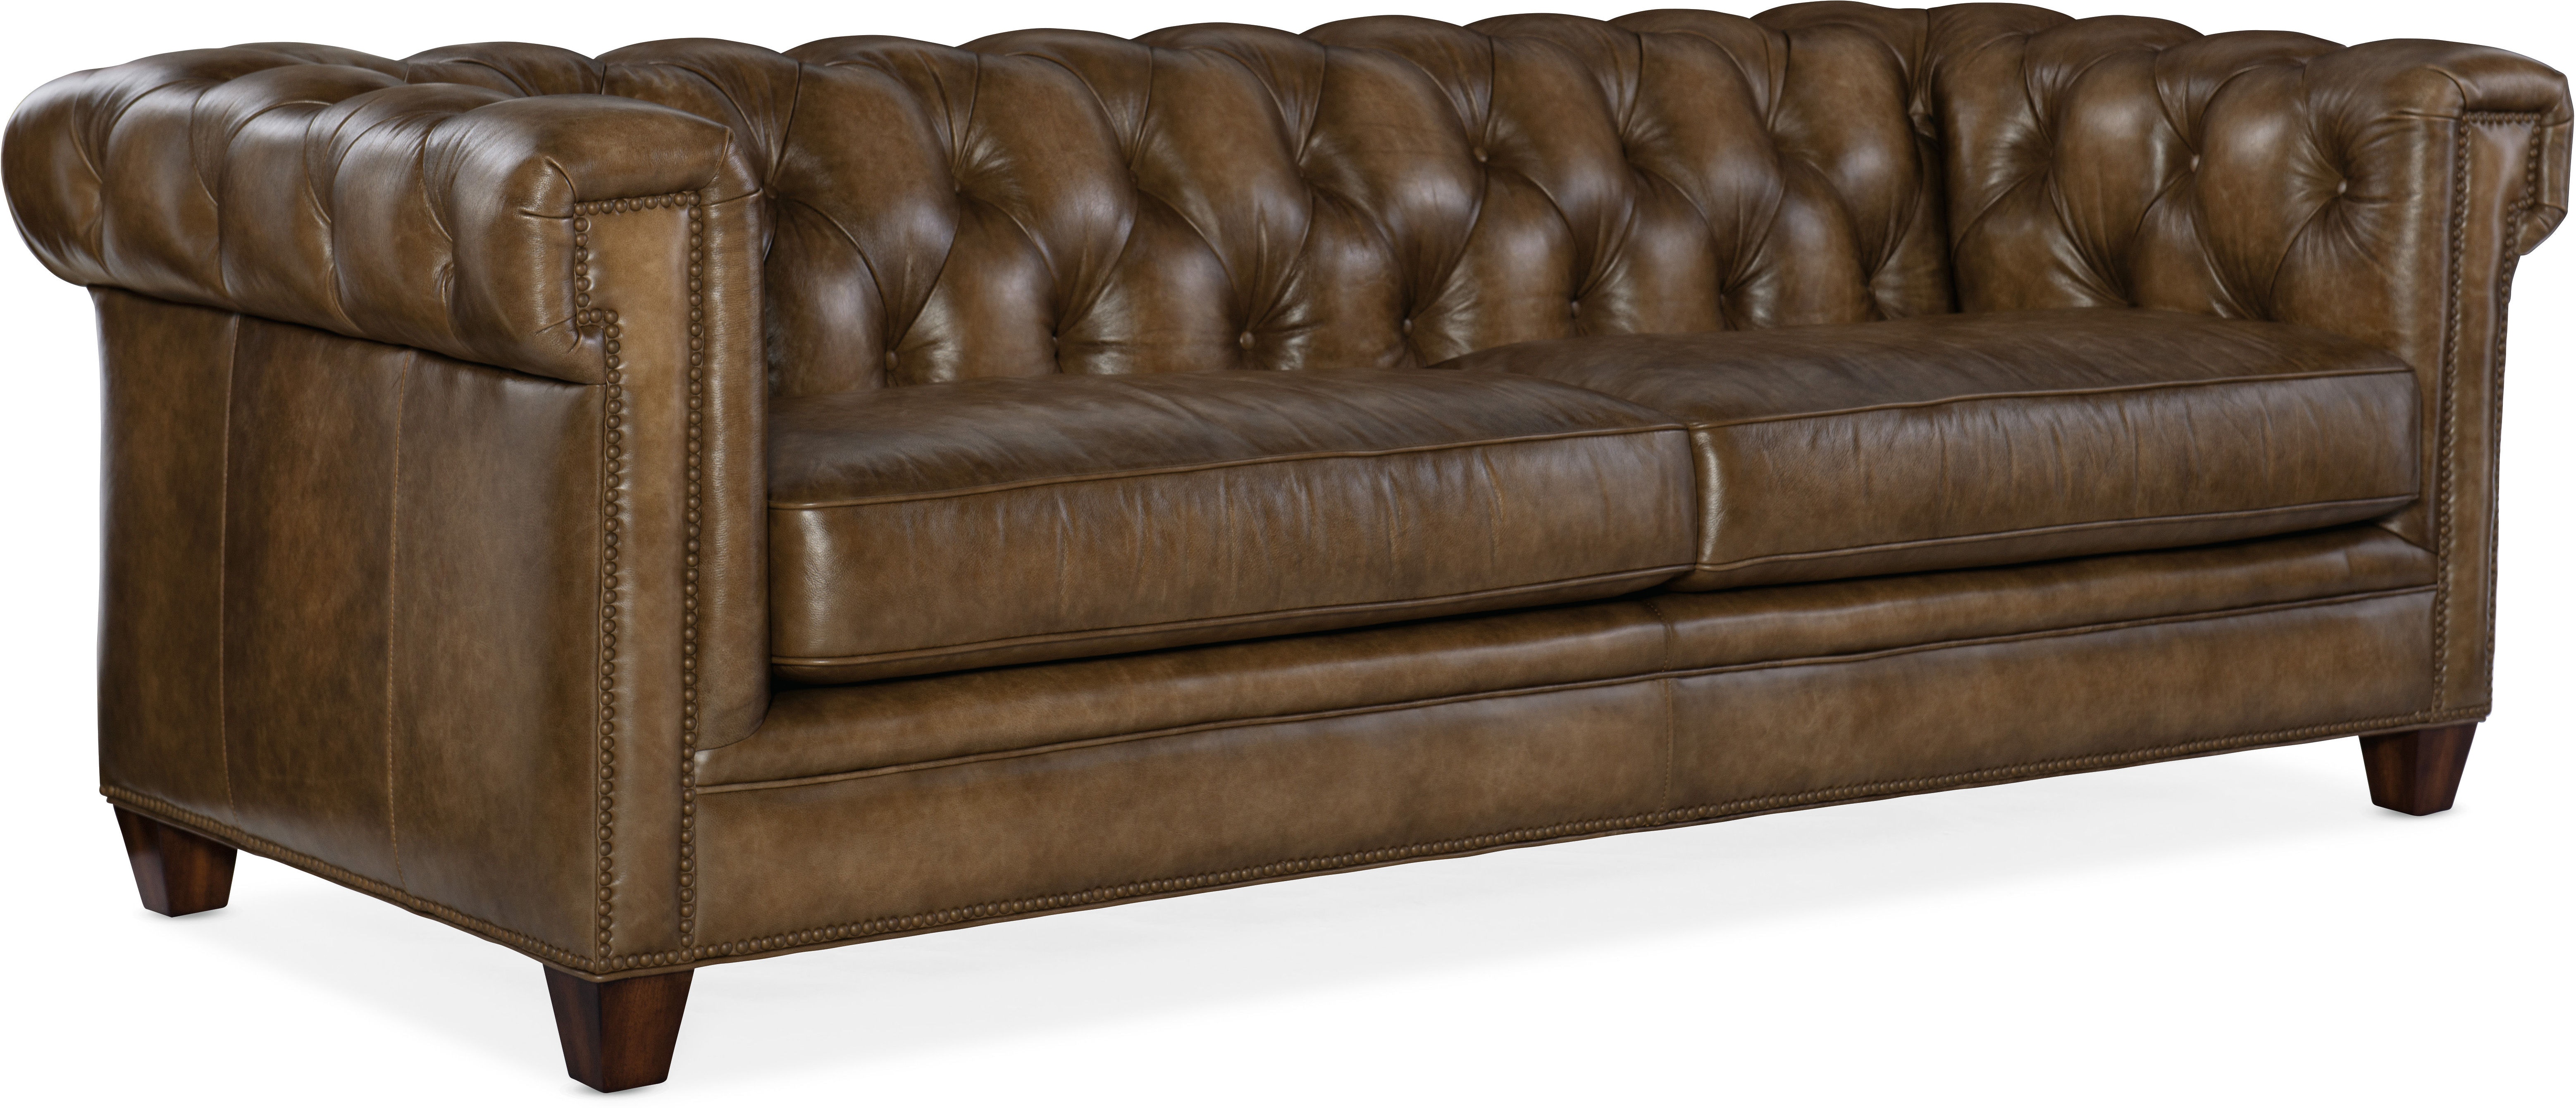 chester tufted leather sofa west elm